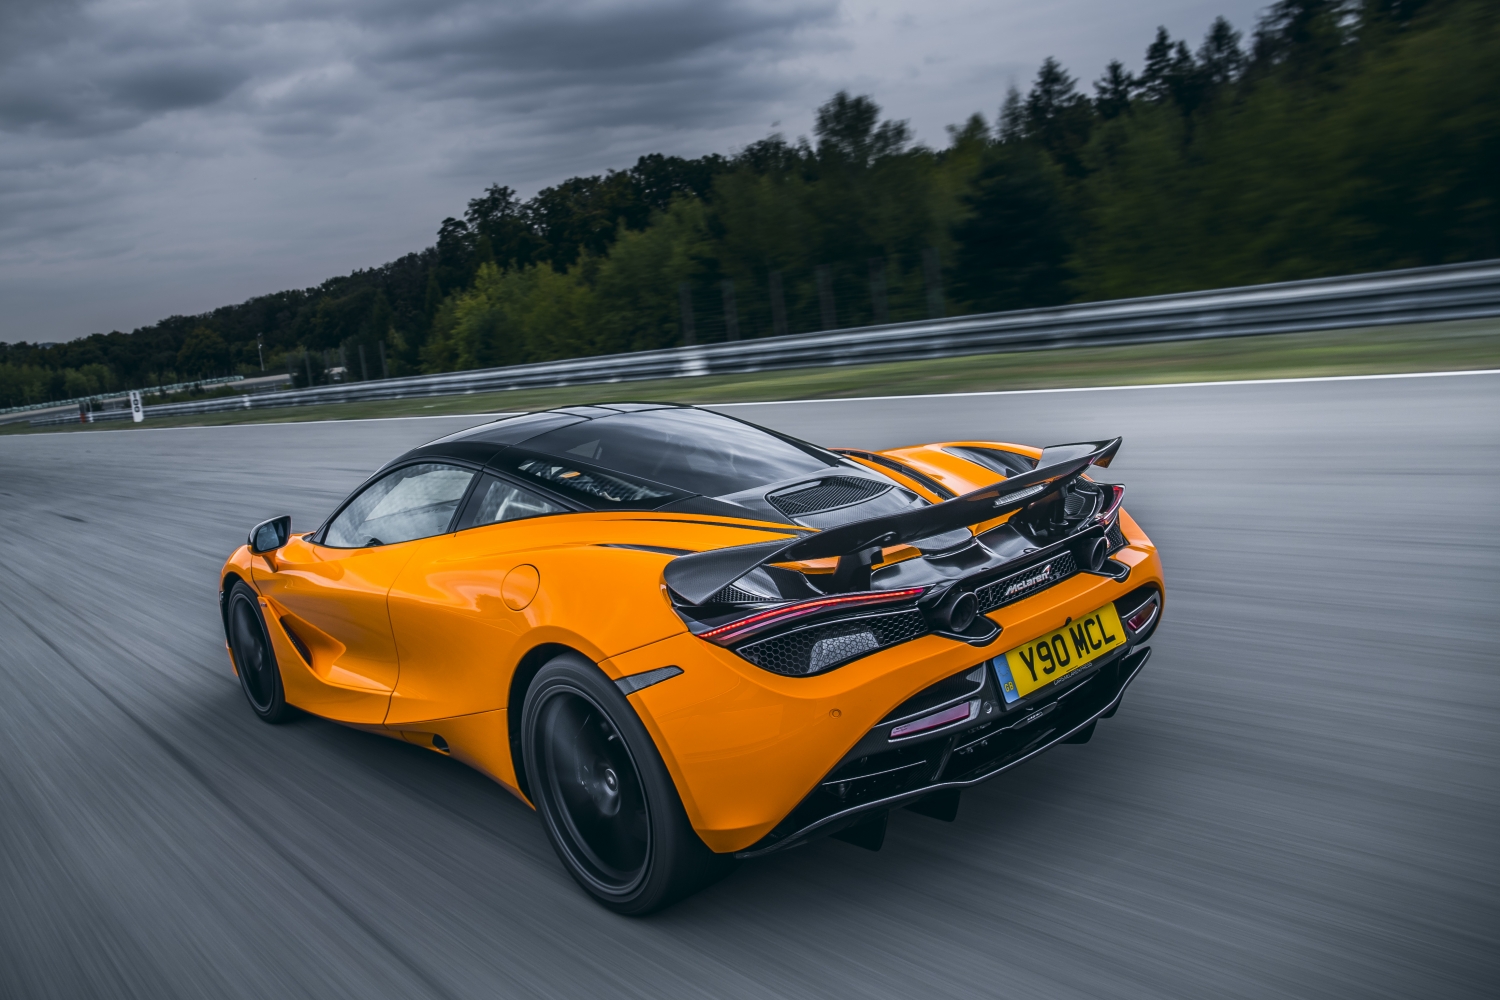 How much does this 2021 McLaren 570S cost?